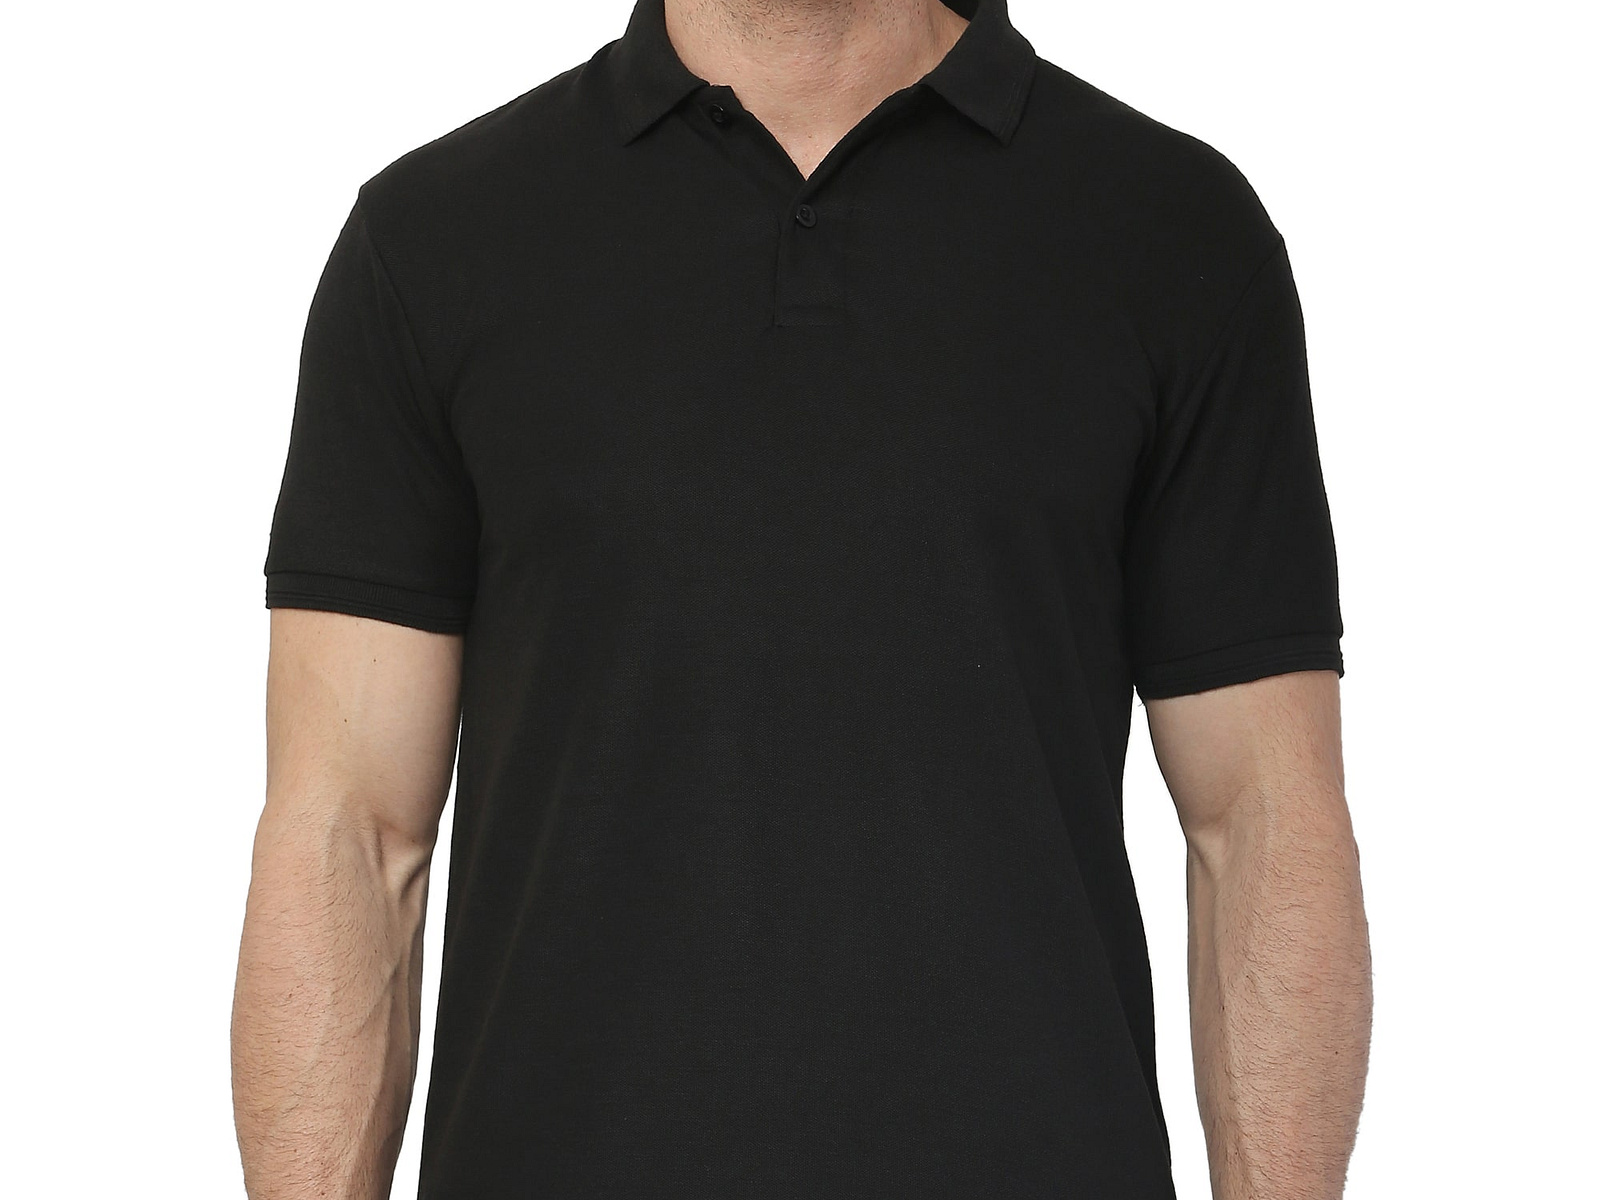 Black Men Polo T-shirts by Thelabelbar on Dribbble